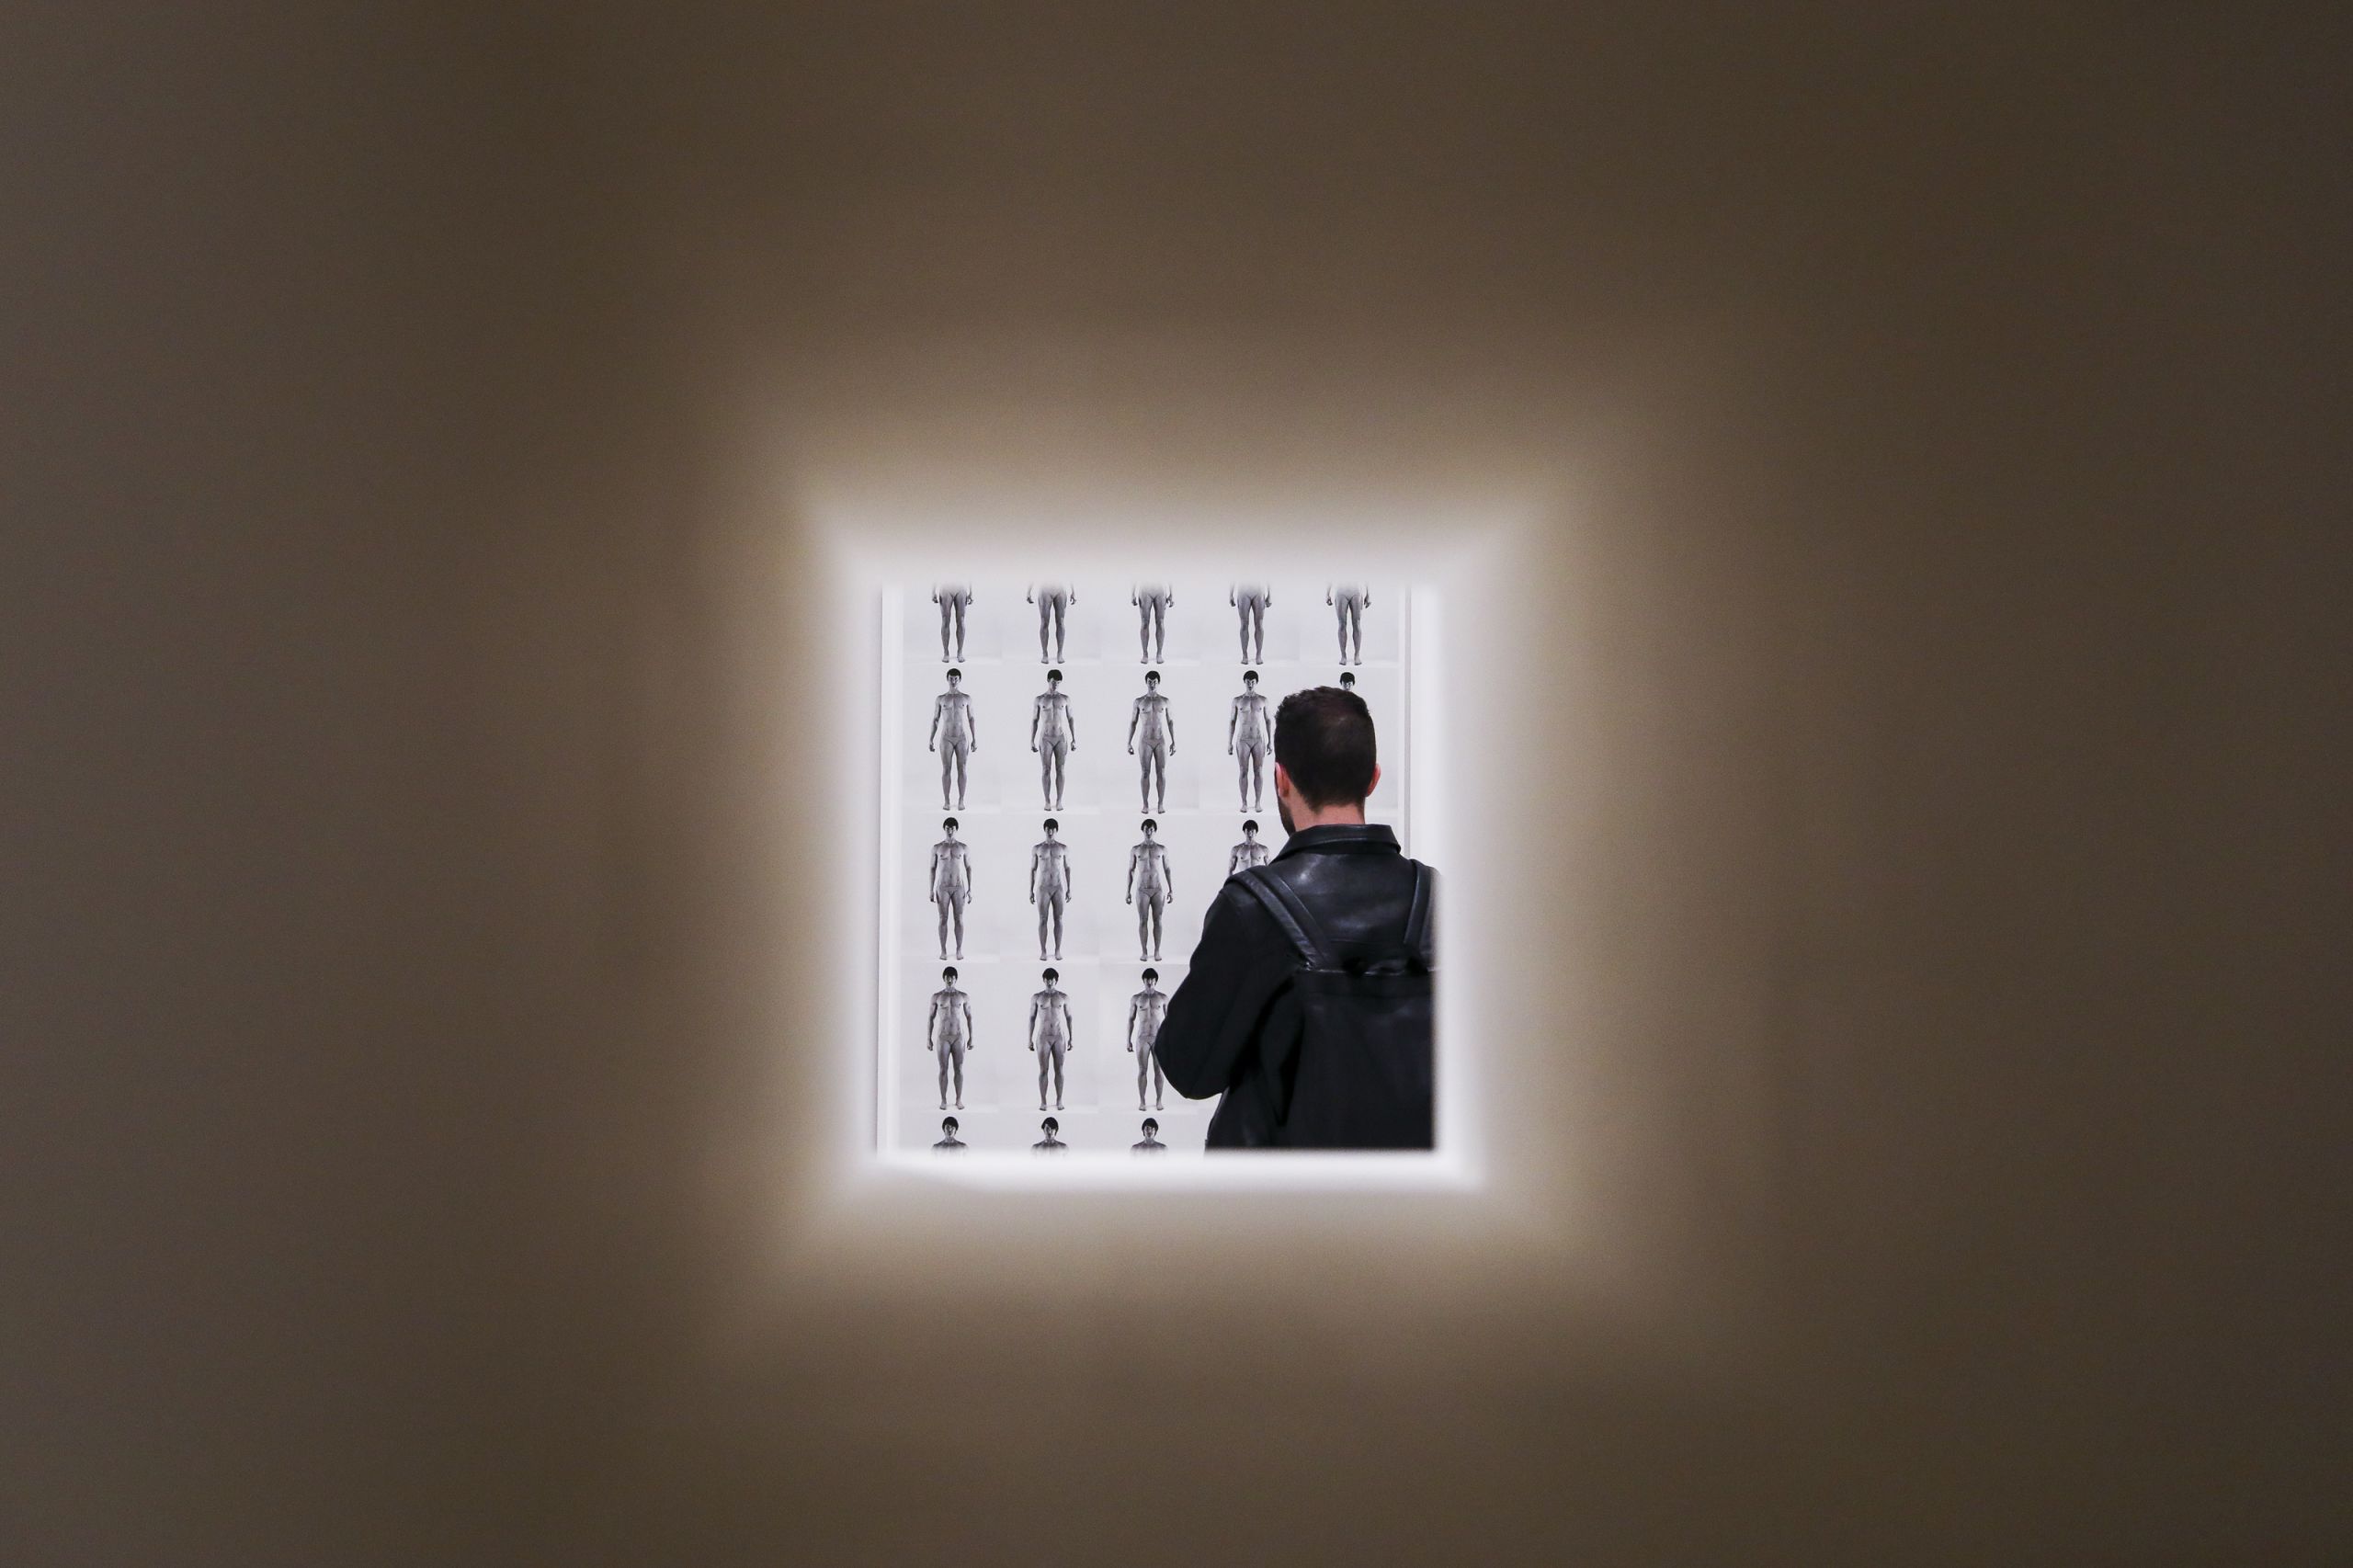 A man in a black jacket with a backpack looks at a black and white image featuring a grid of timelapse photographs of a muscular figure. The image is framed in a square, with the photograph taken through a hole in the gallery wall. 